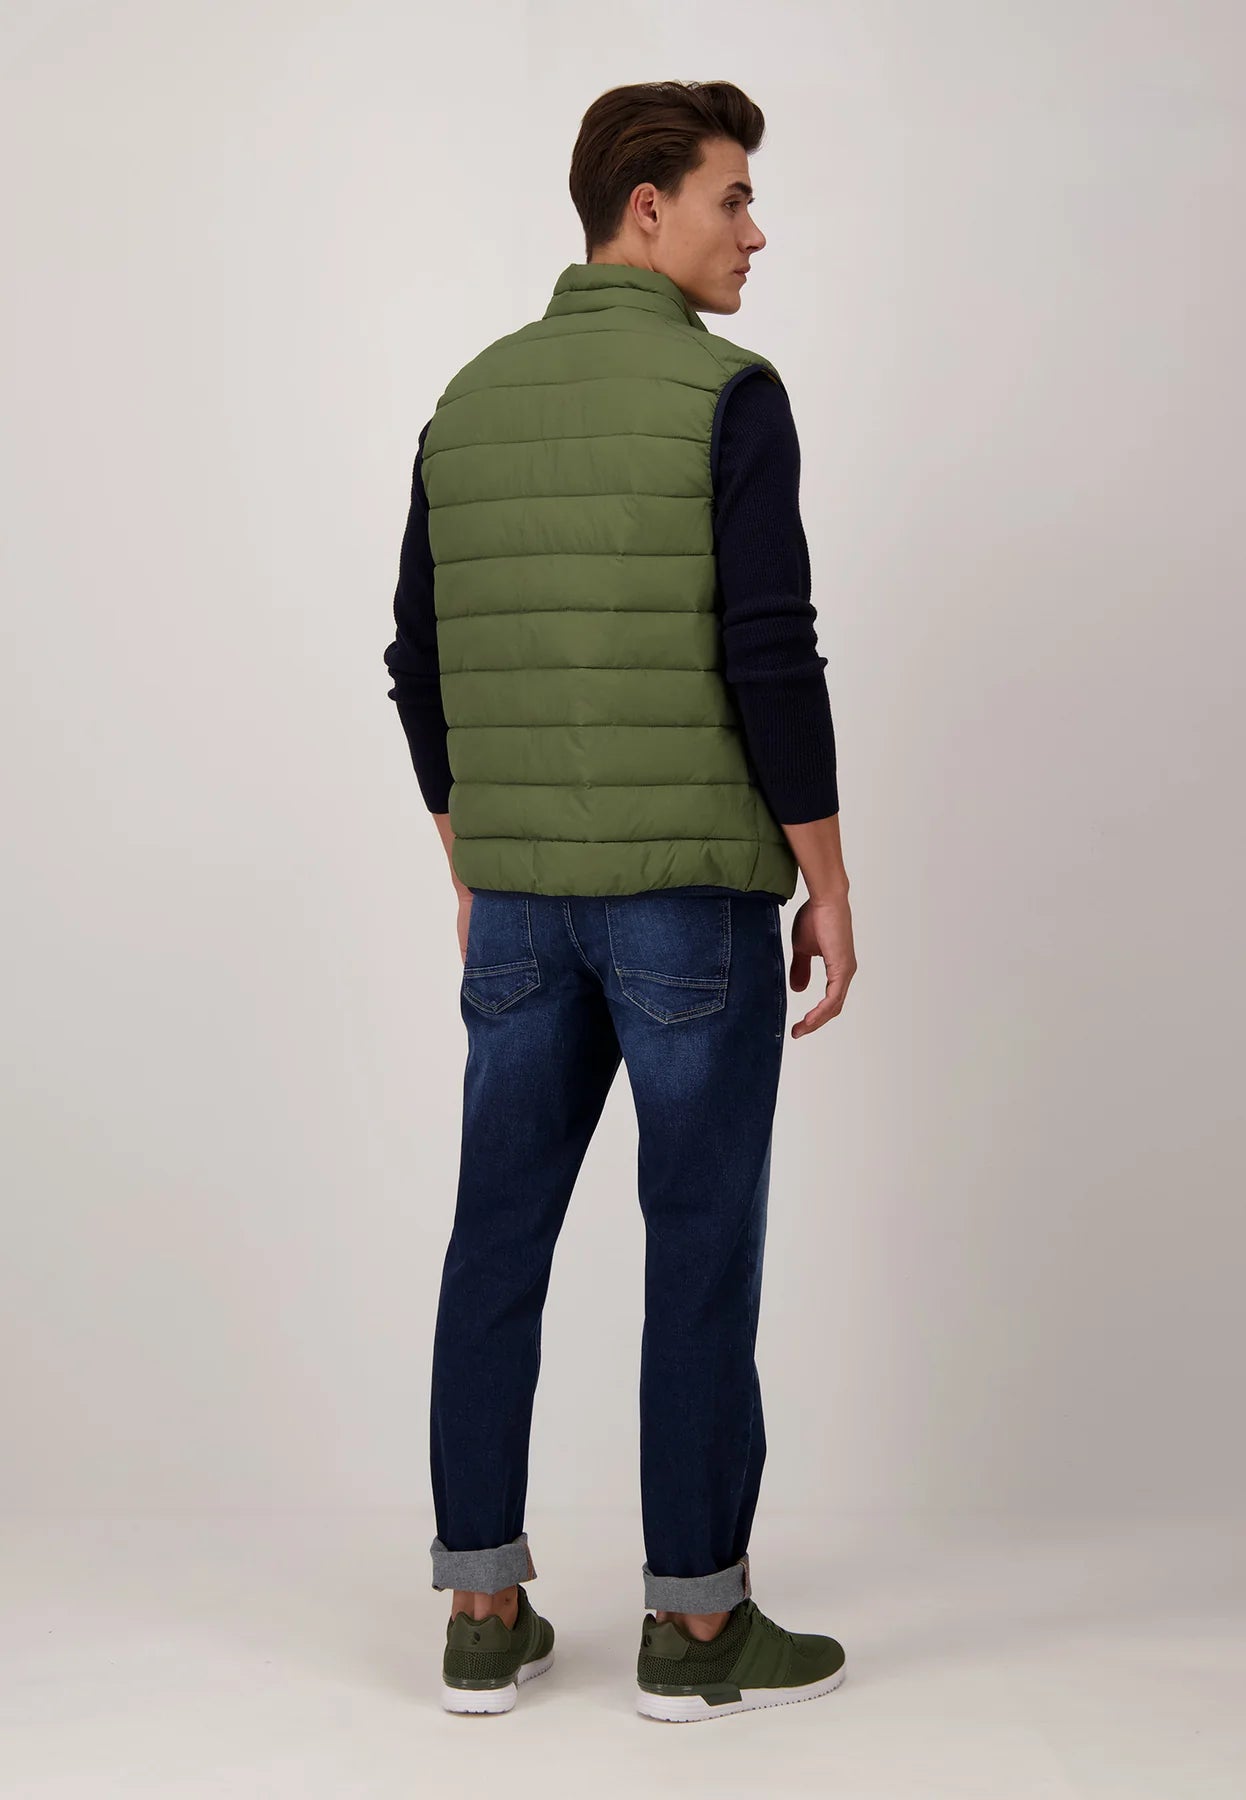 A Model Wearing Fynch-Hatton Quilted Top Padded Gilet Olive Green Rear View